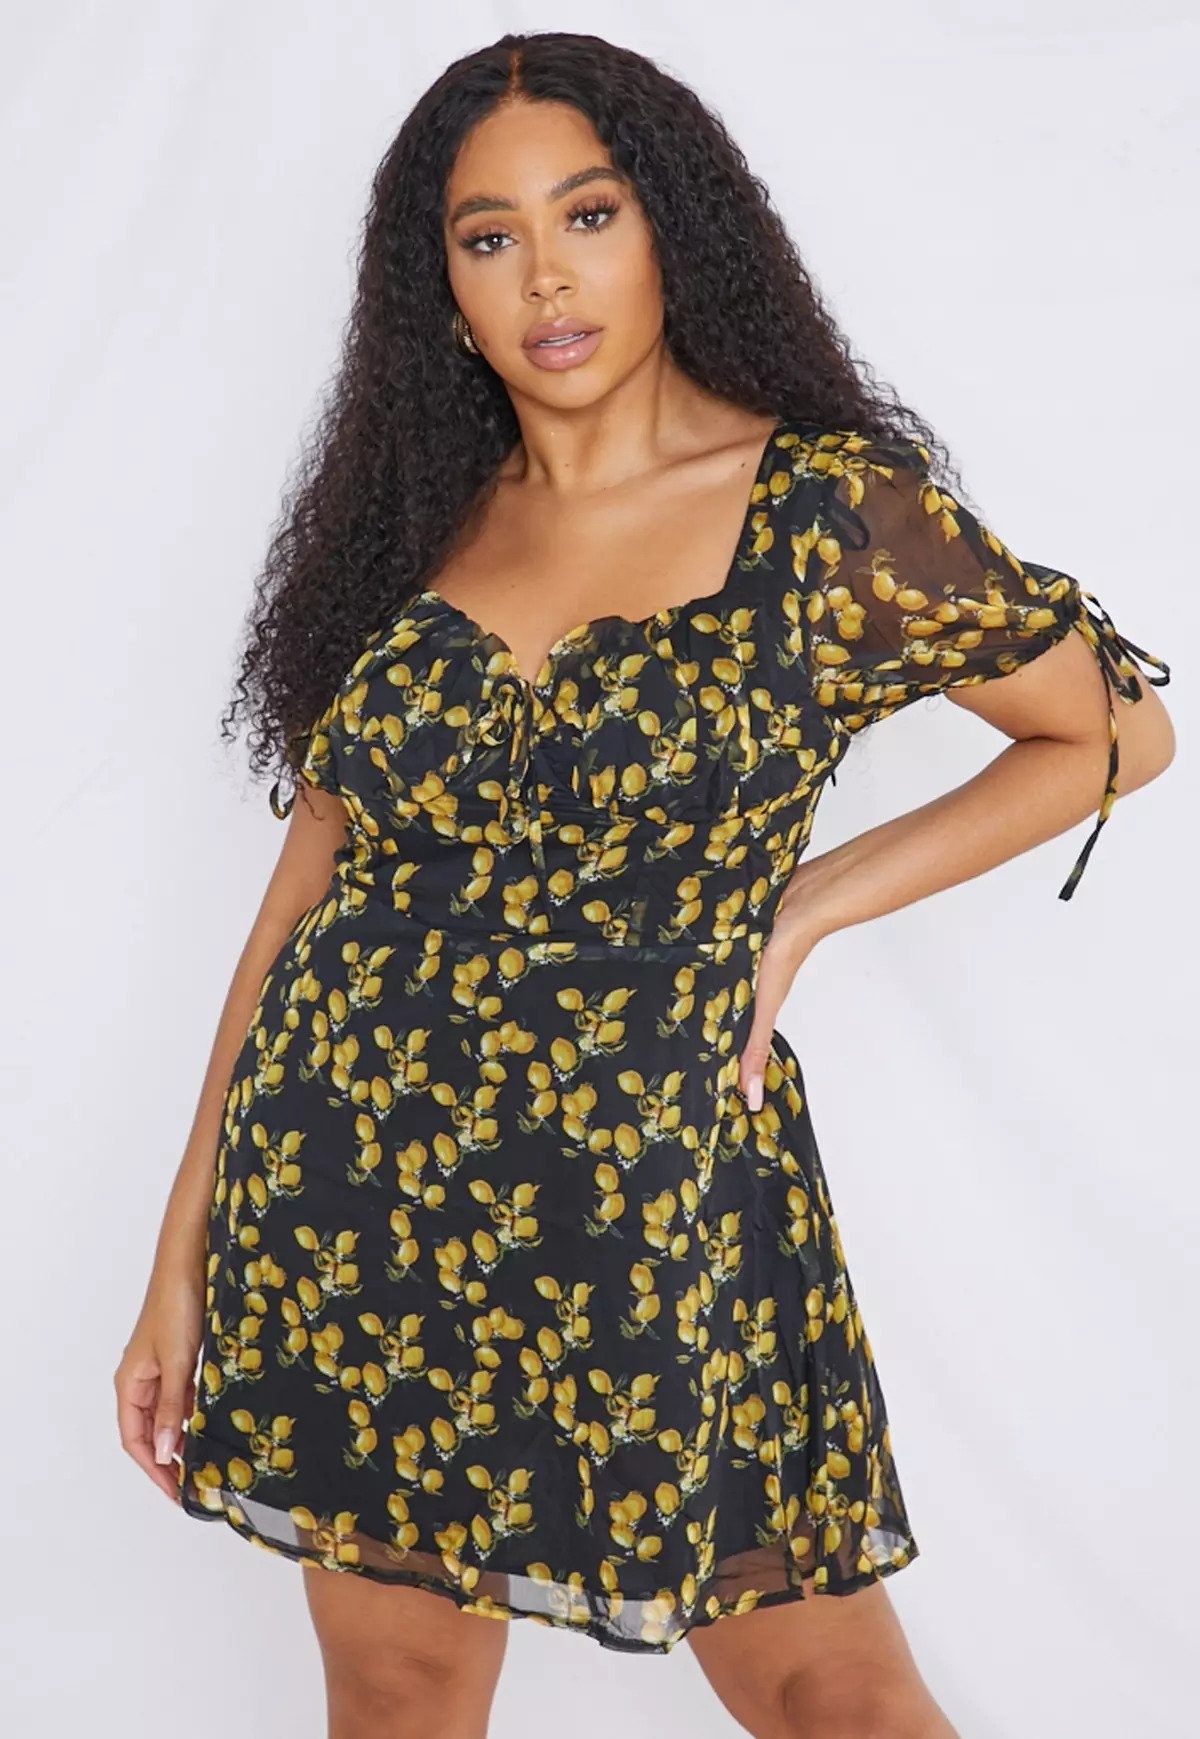 A short milkmaid-style dress with a sheer lemon fabric over a black slip. The bust is ruched with a short tie in the front and the sleeves are short and sheer with matching ties. 